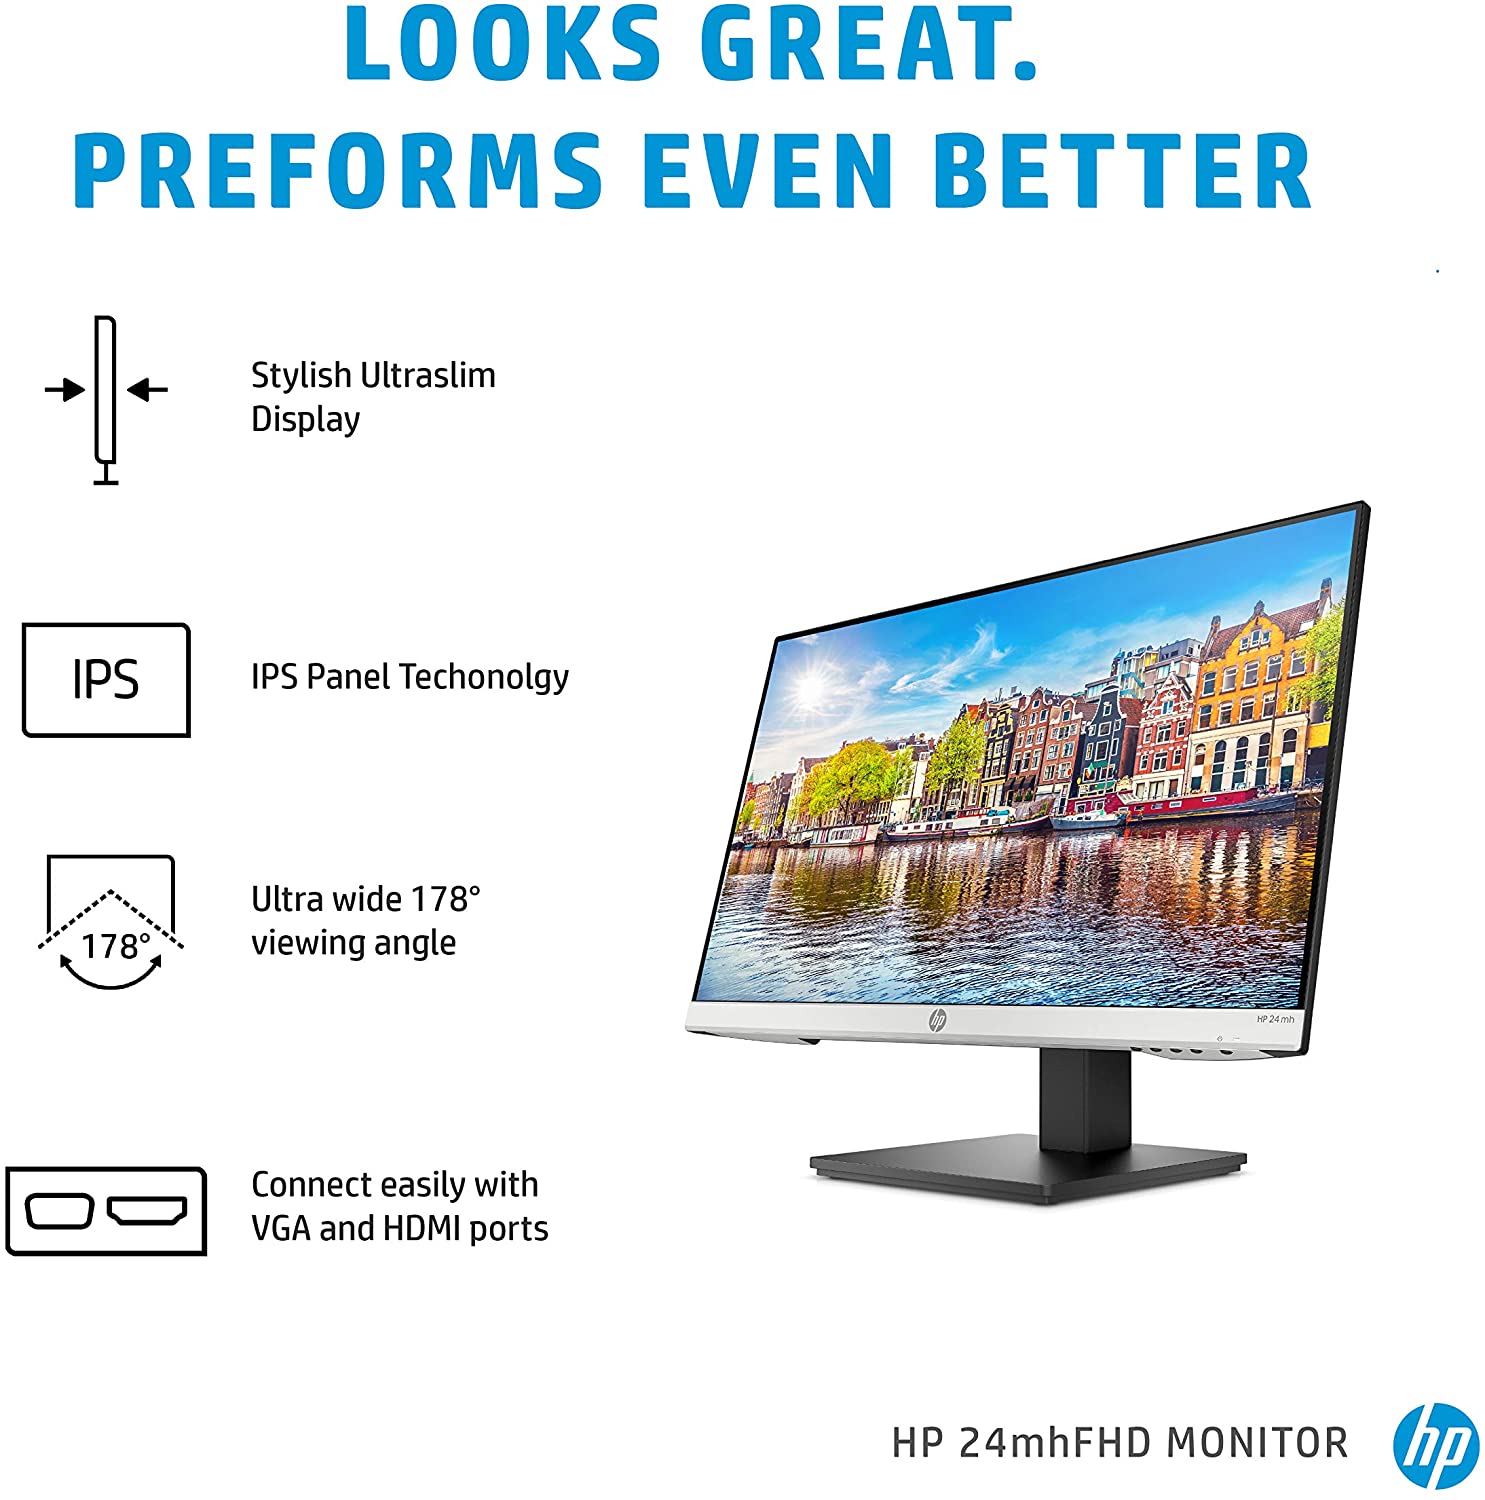 HP 24mh FHD Monitor - Computer Monitor with 23.8-inch IPS Display (1080p) - Built-in Speakers and VESA Mounting - Height/Tilt Adjustment for Ergonomic Viewing - HDMI and DisplayPort - (1D0J9AA#ABA)